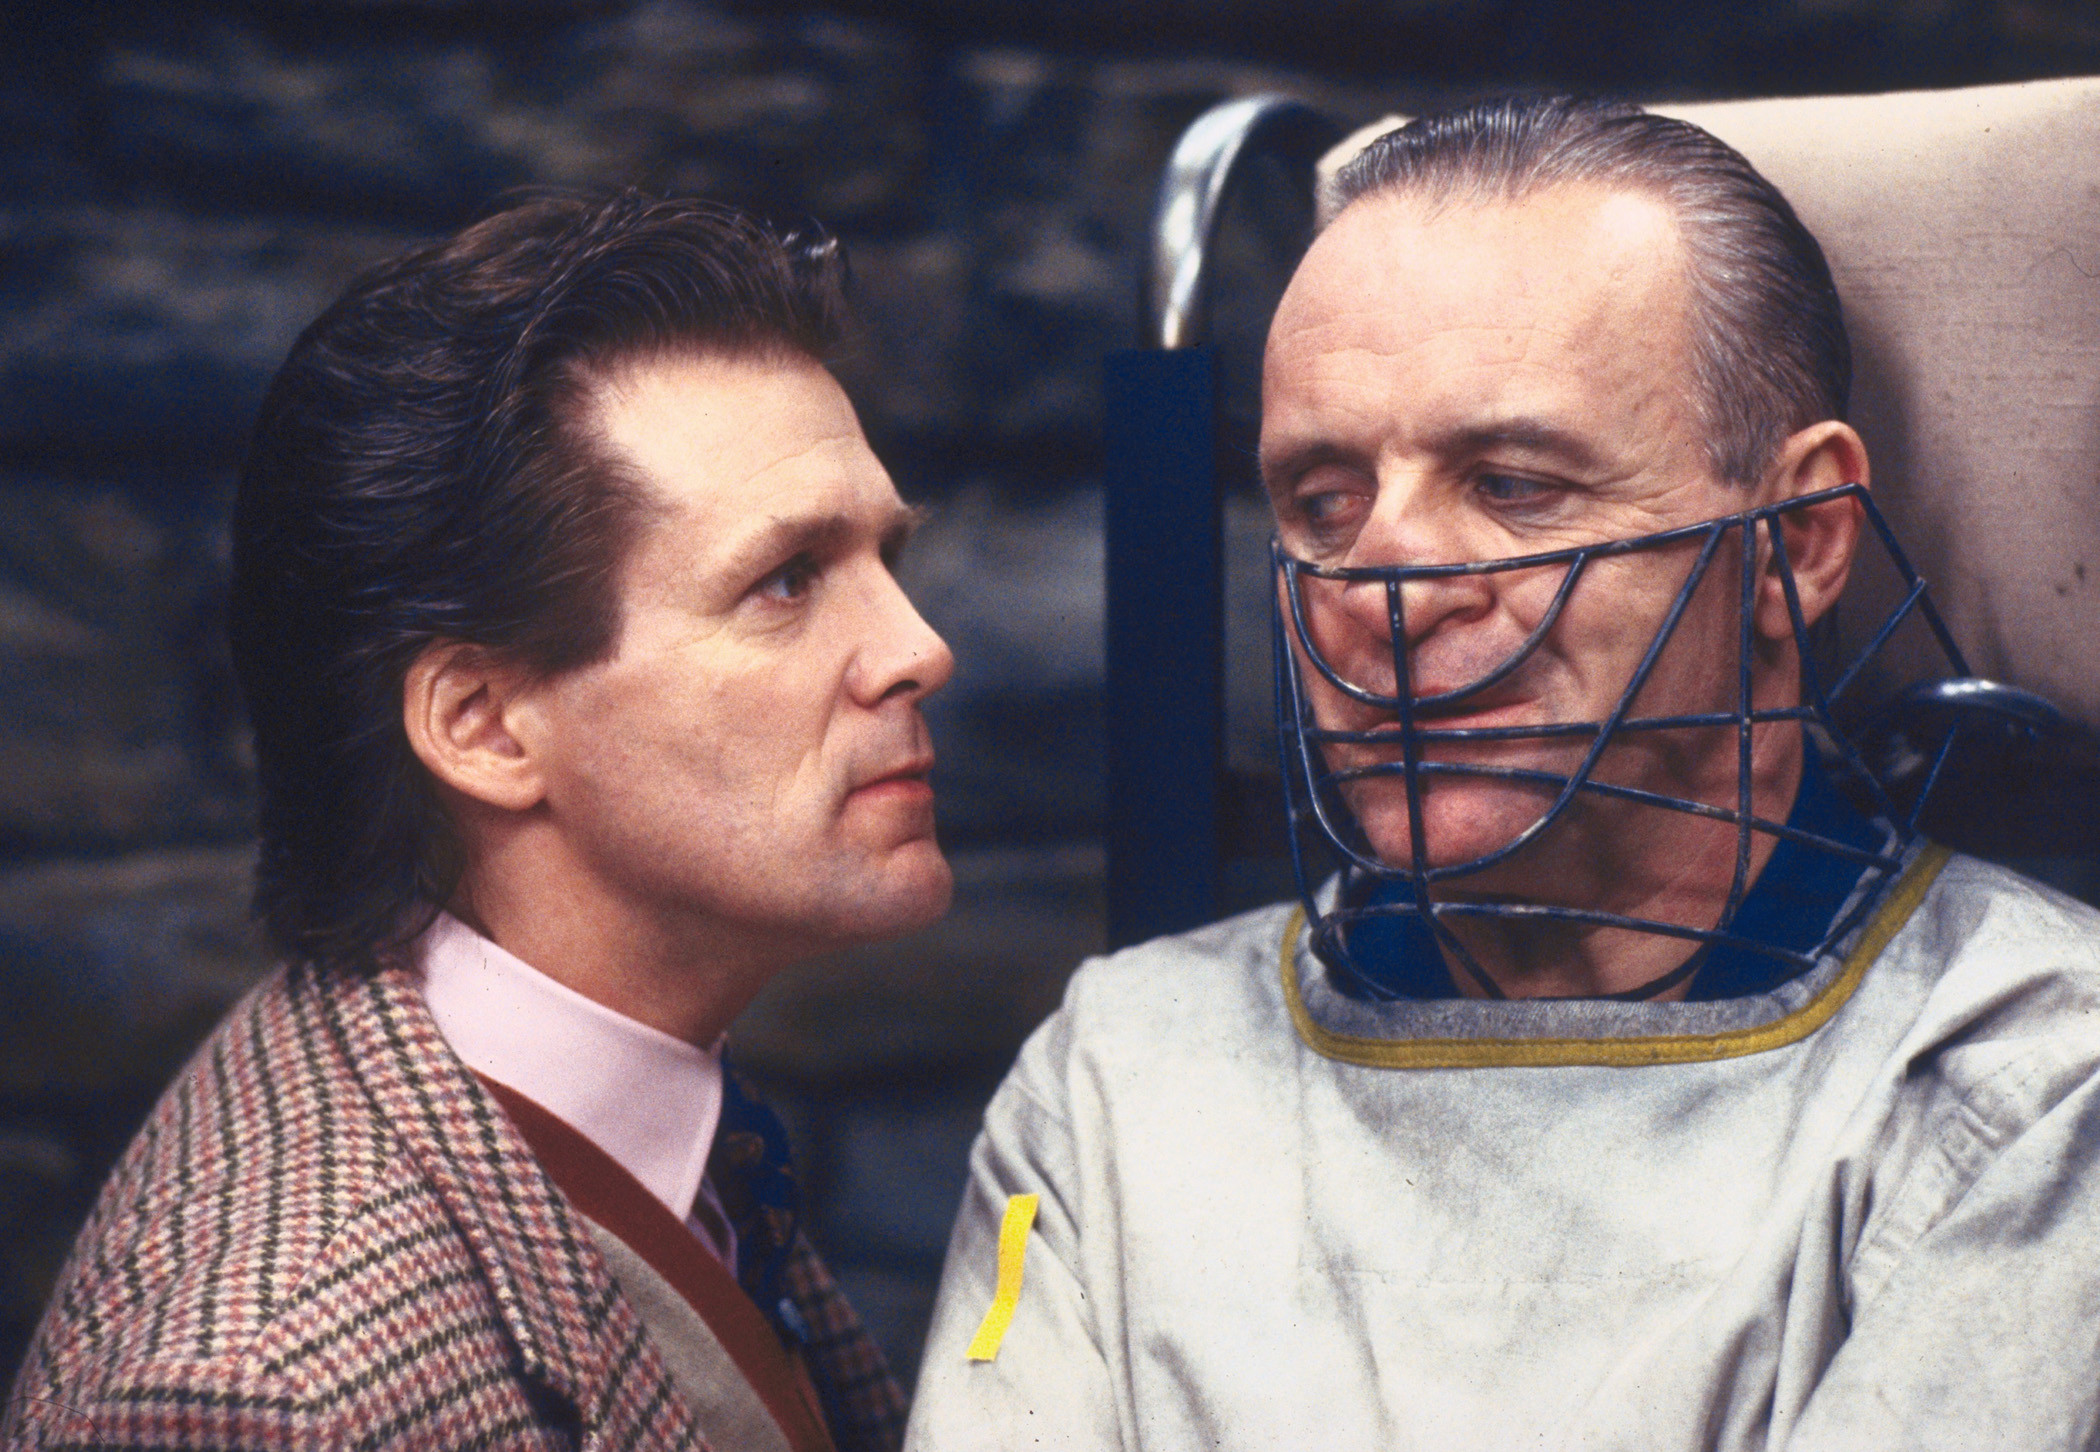 2100x1452 Anthony Hopkins and Anthony Heald, "The Silence of the Lambs" ...